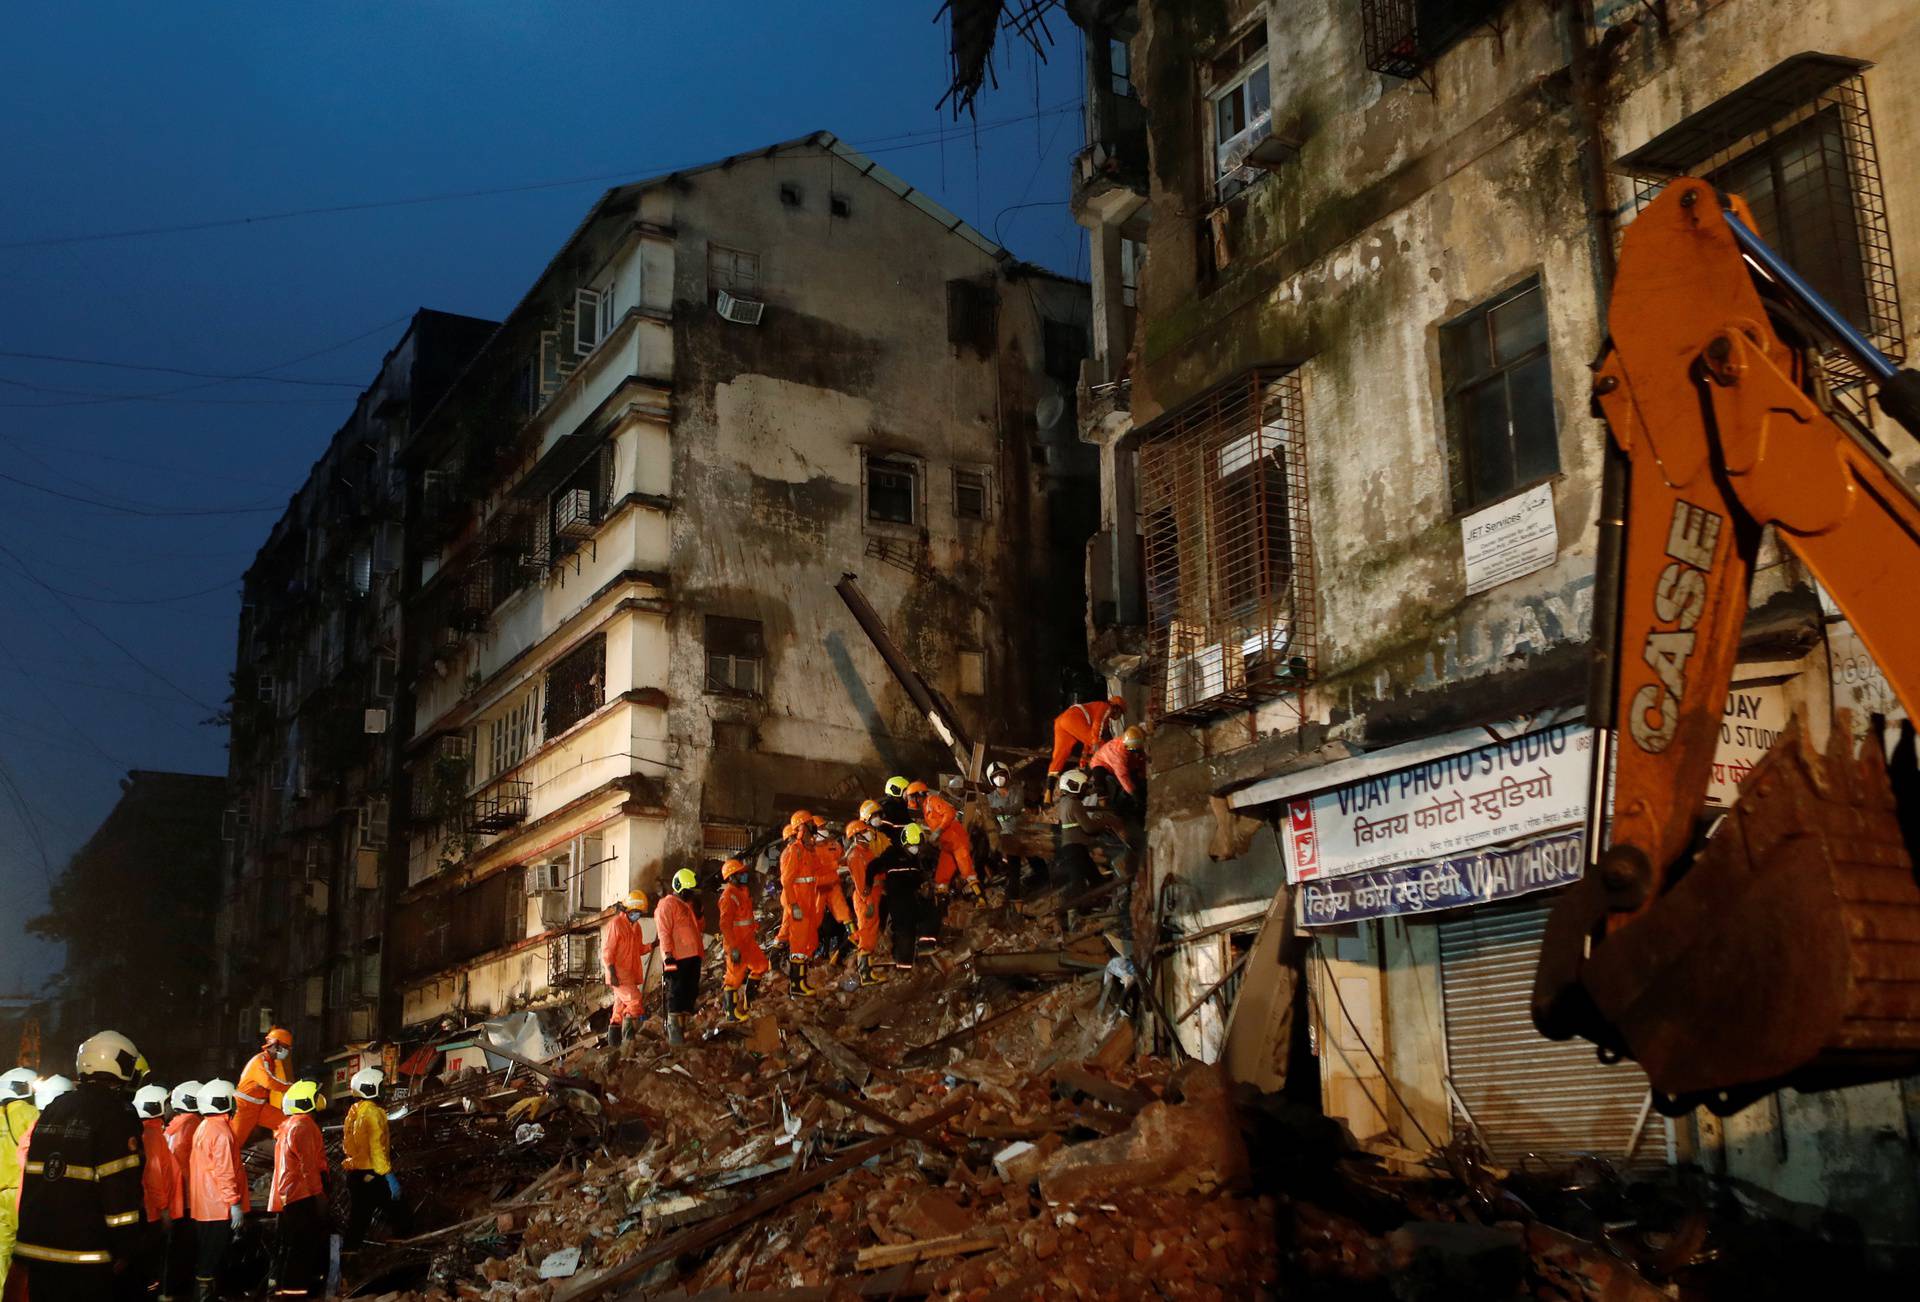 National Disaster Response Force (NDRF) and fire brigade personnel look for survivors trapped in the debris after part of a residential building collapsed following heavy rains in Mumbai